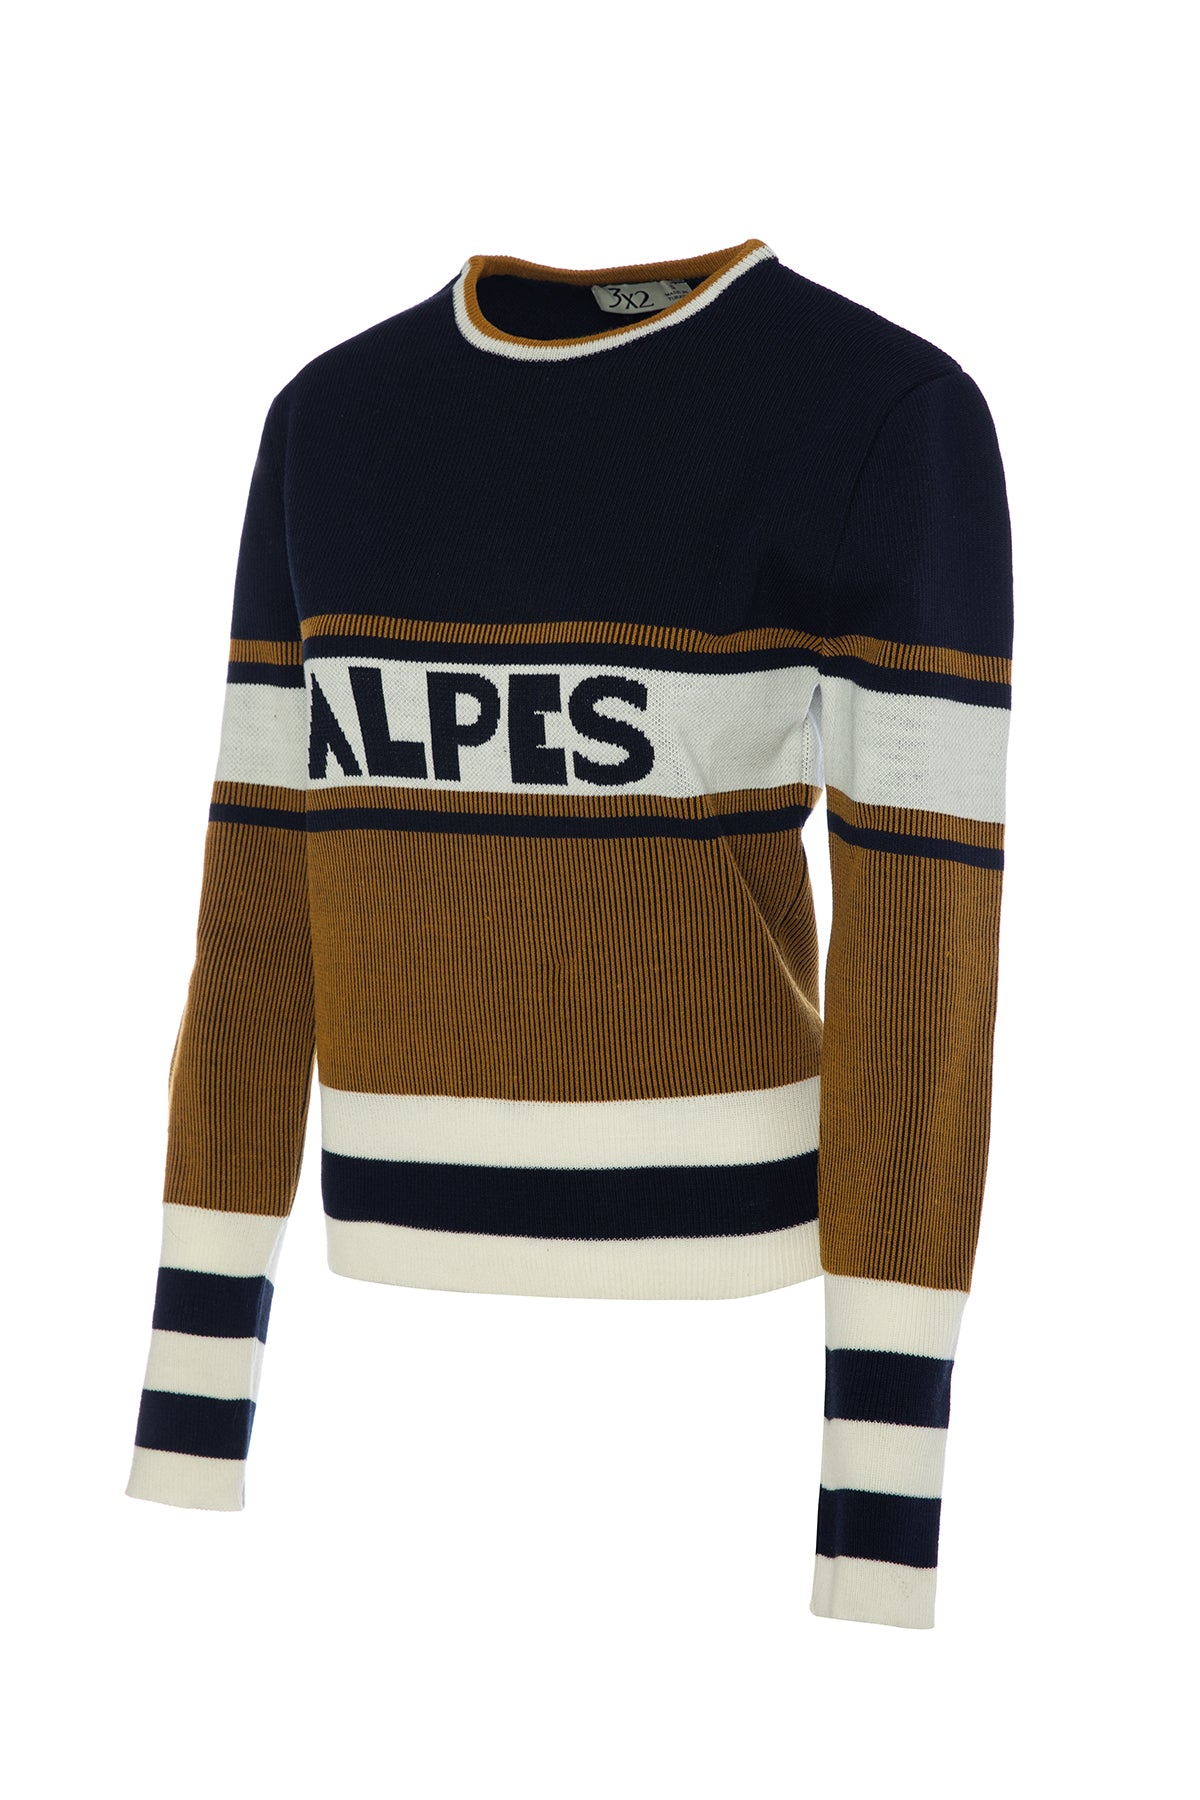 Alpes Mustard Color Retro Knitwear Sweater and Beret